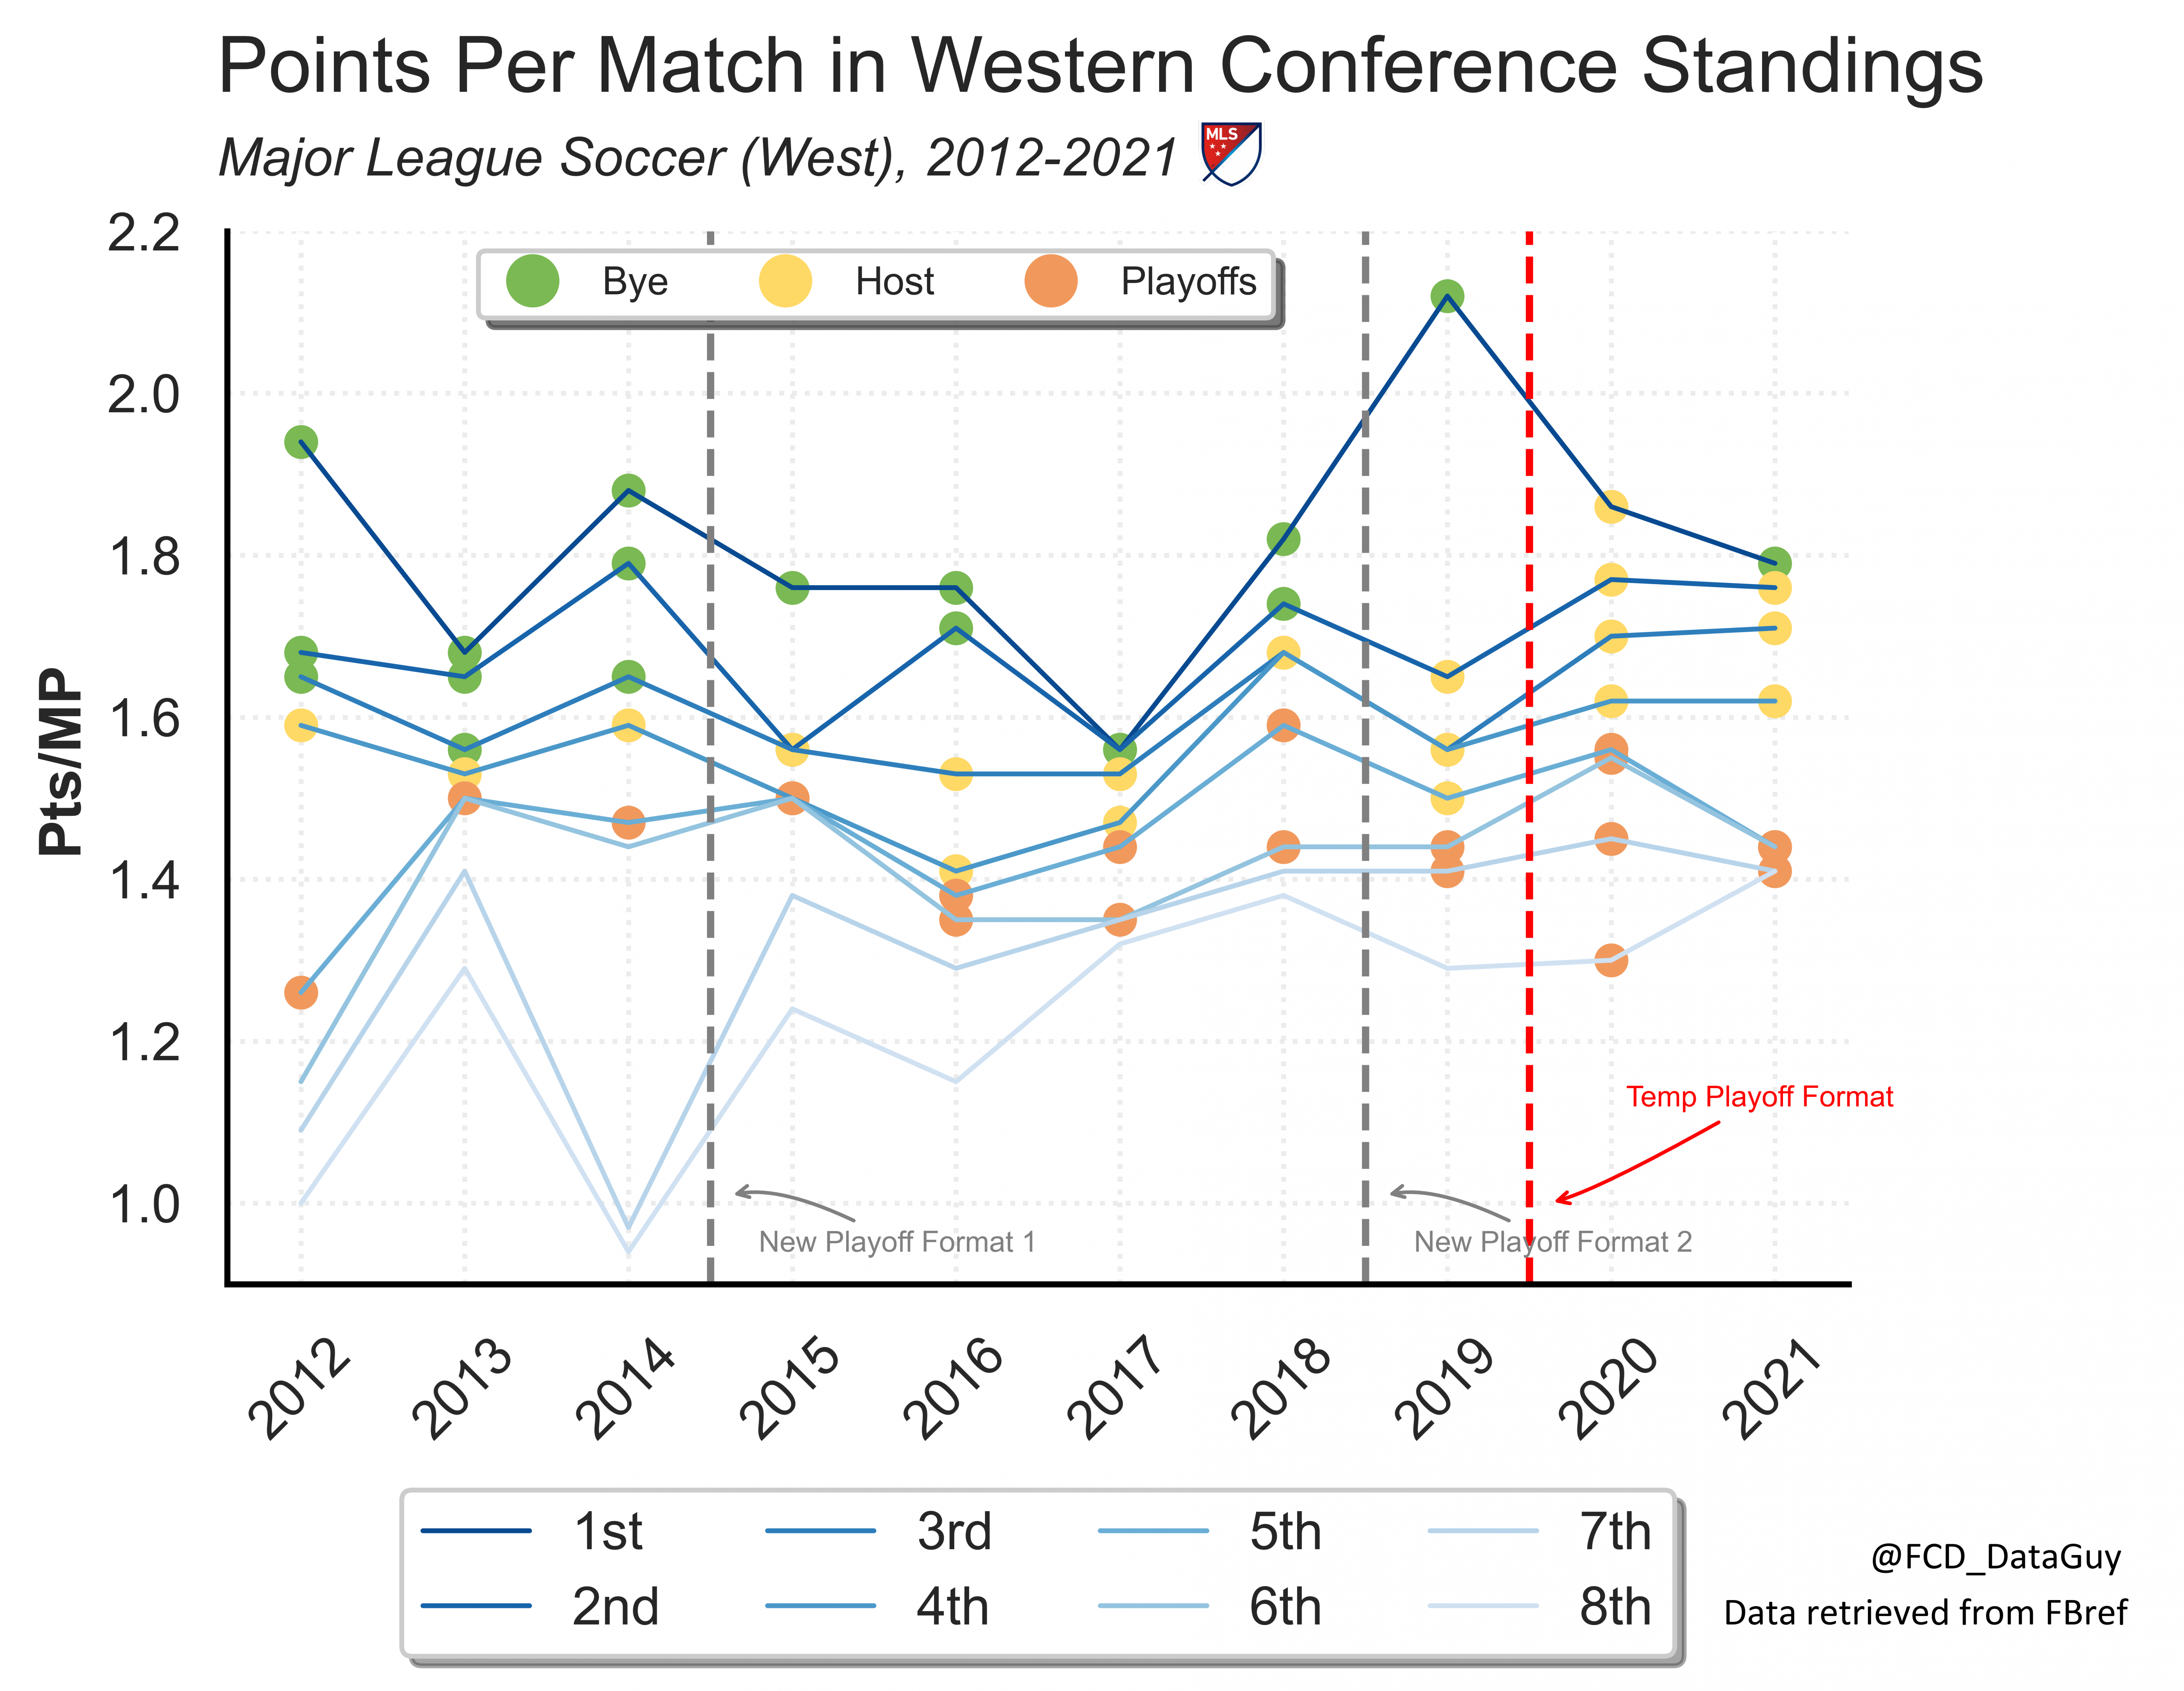 Points Per Match in Western Conference standings.